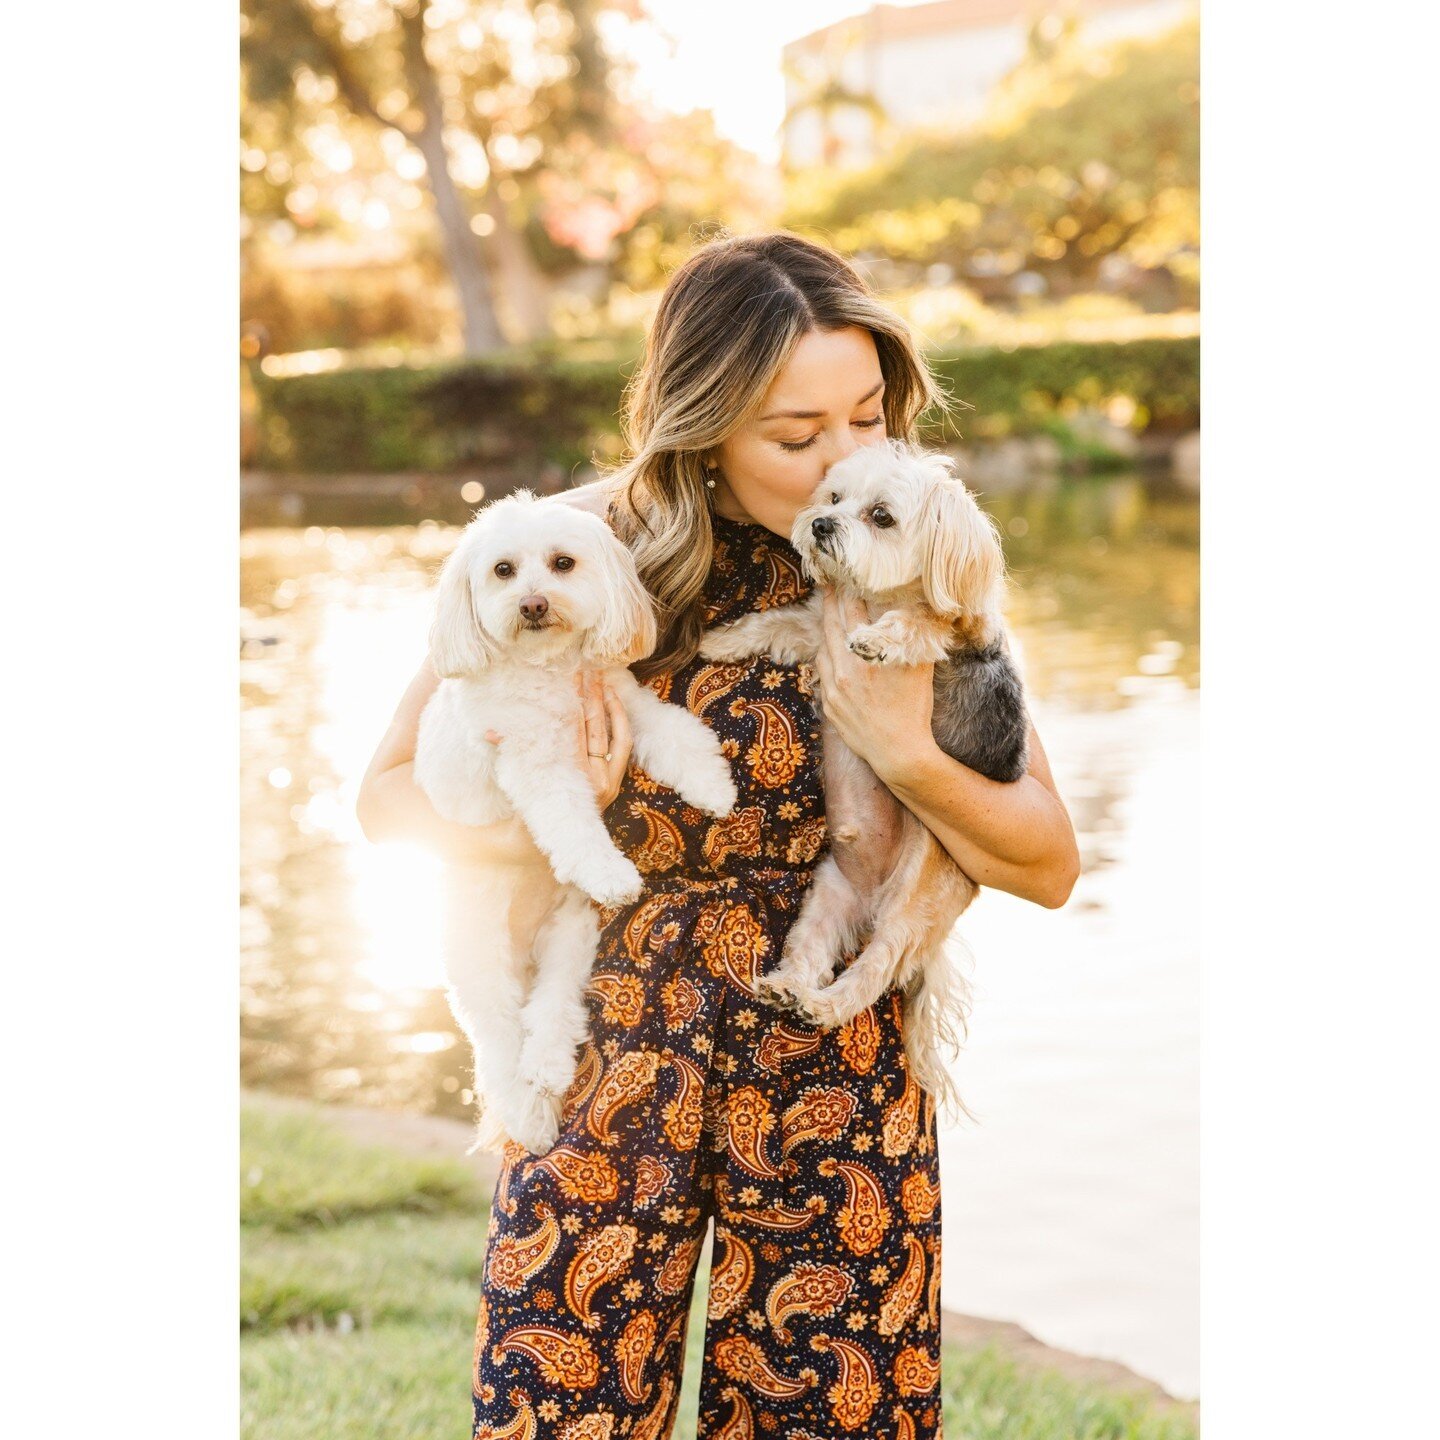 Puppies are definitely a girl's best friend. Loved this glowy mini session from last fall! Keep an eye out for some mini session announcements coming up soon! I will definitely be taking advantage of SB's green season as well as the wildflowers if th